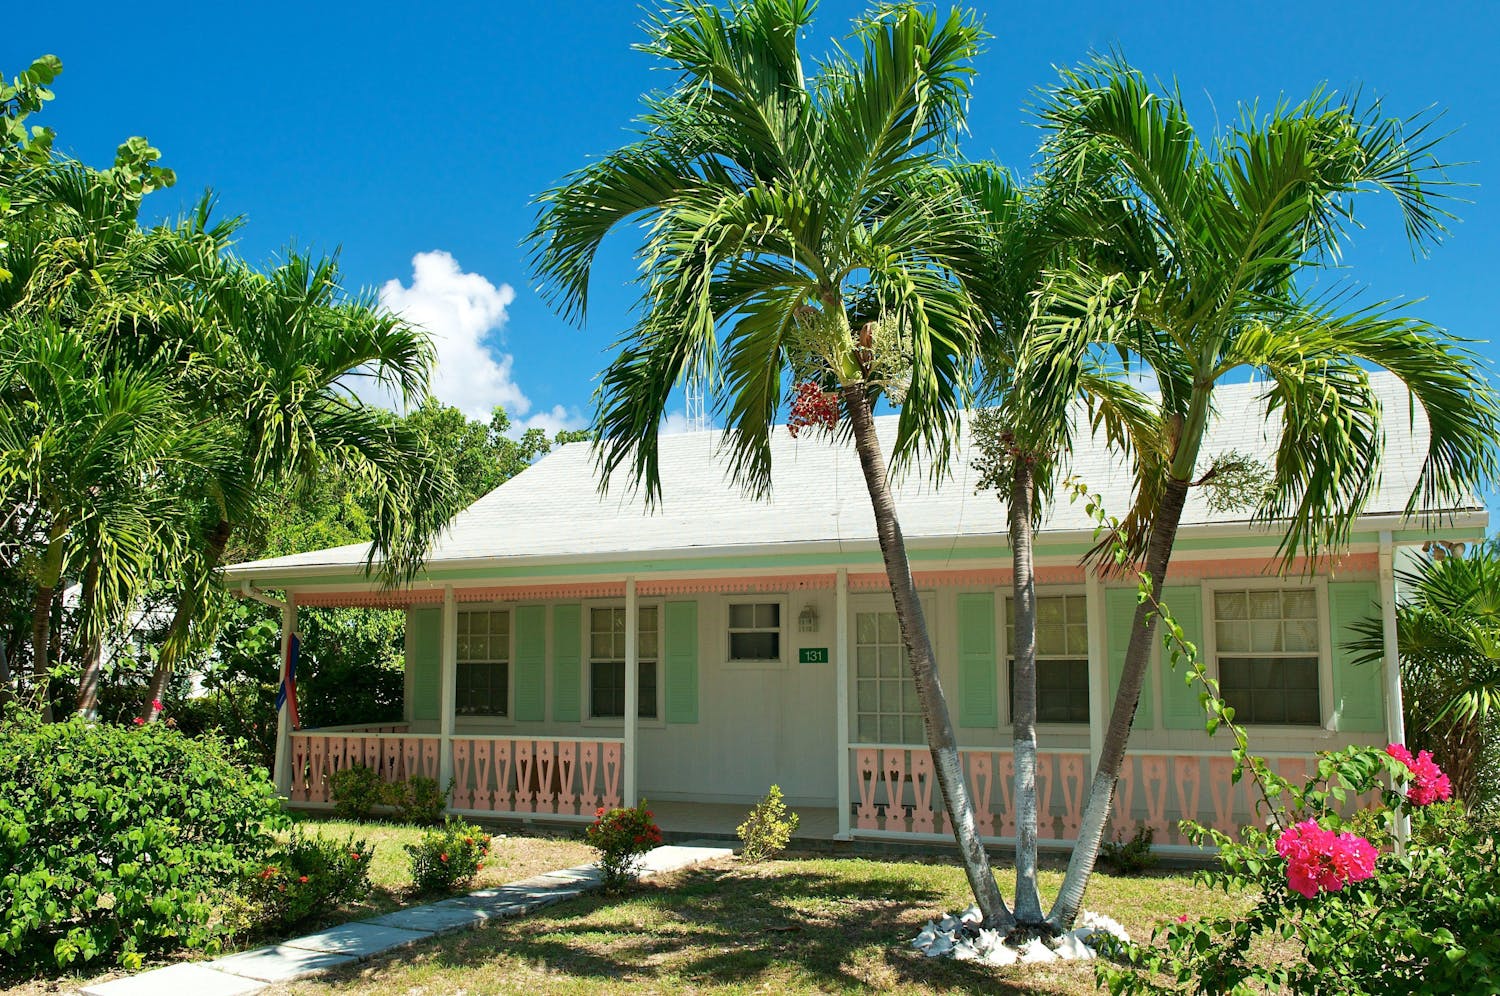 Old cayman style home in light green